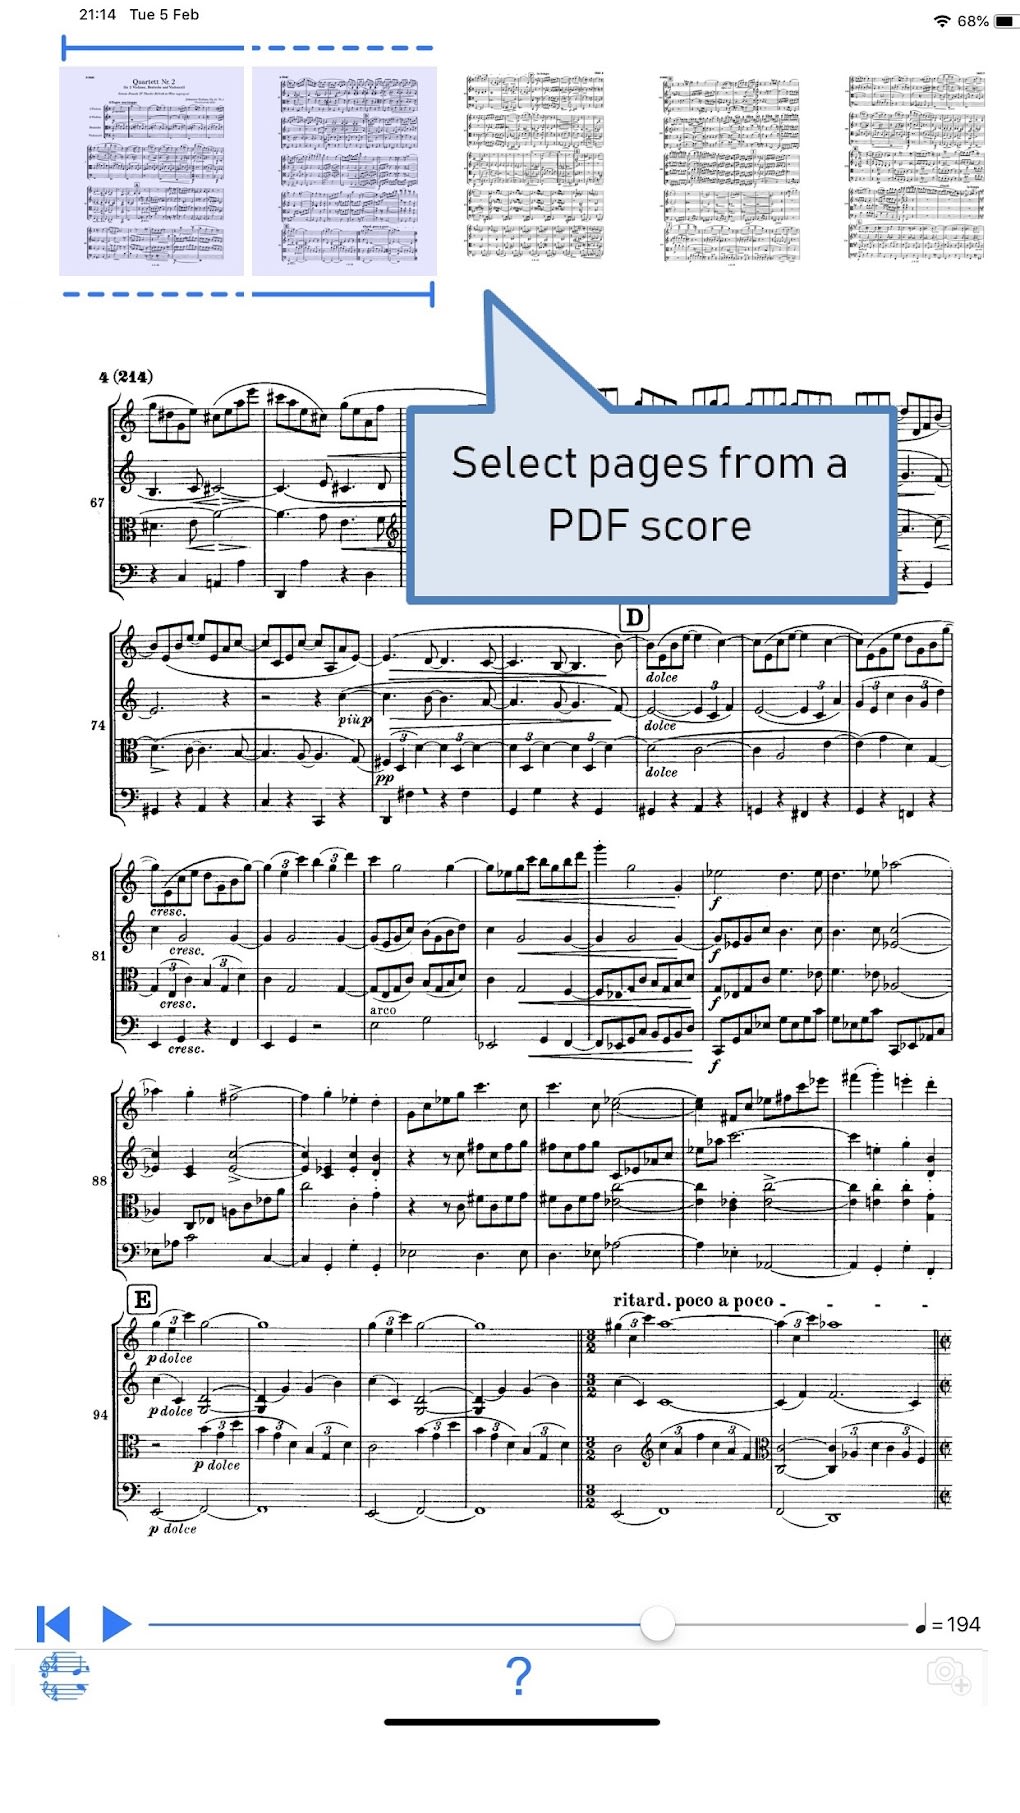 PLAYSCORE 2 NEW RELEASE FOR ANDROID™ 